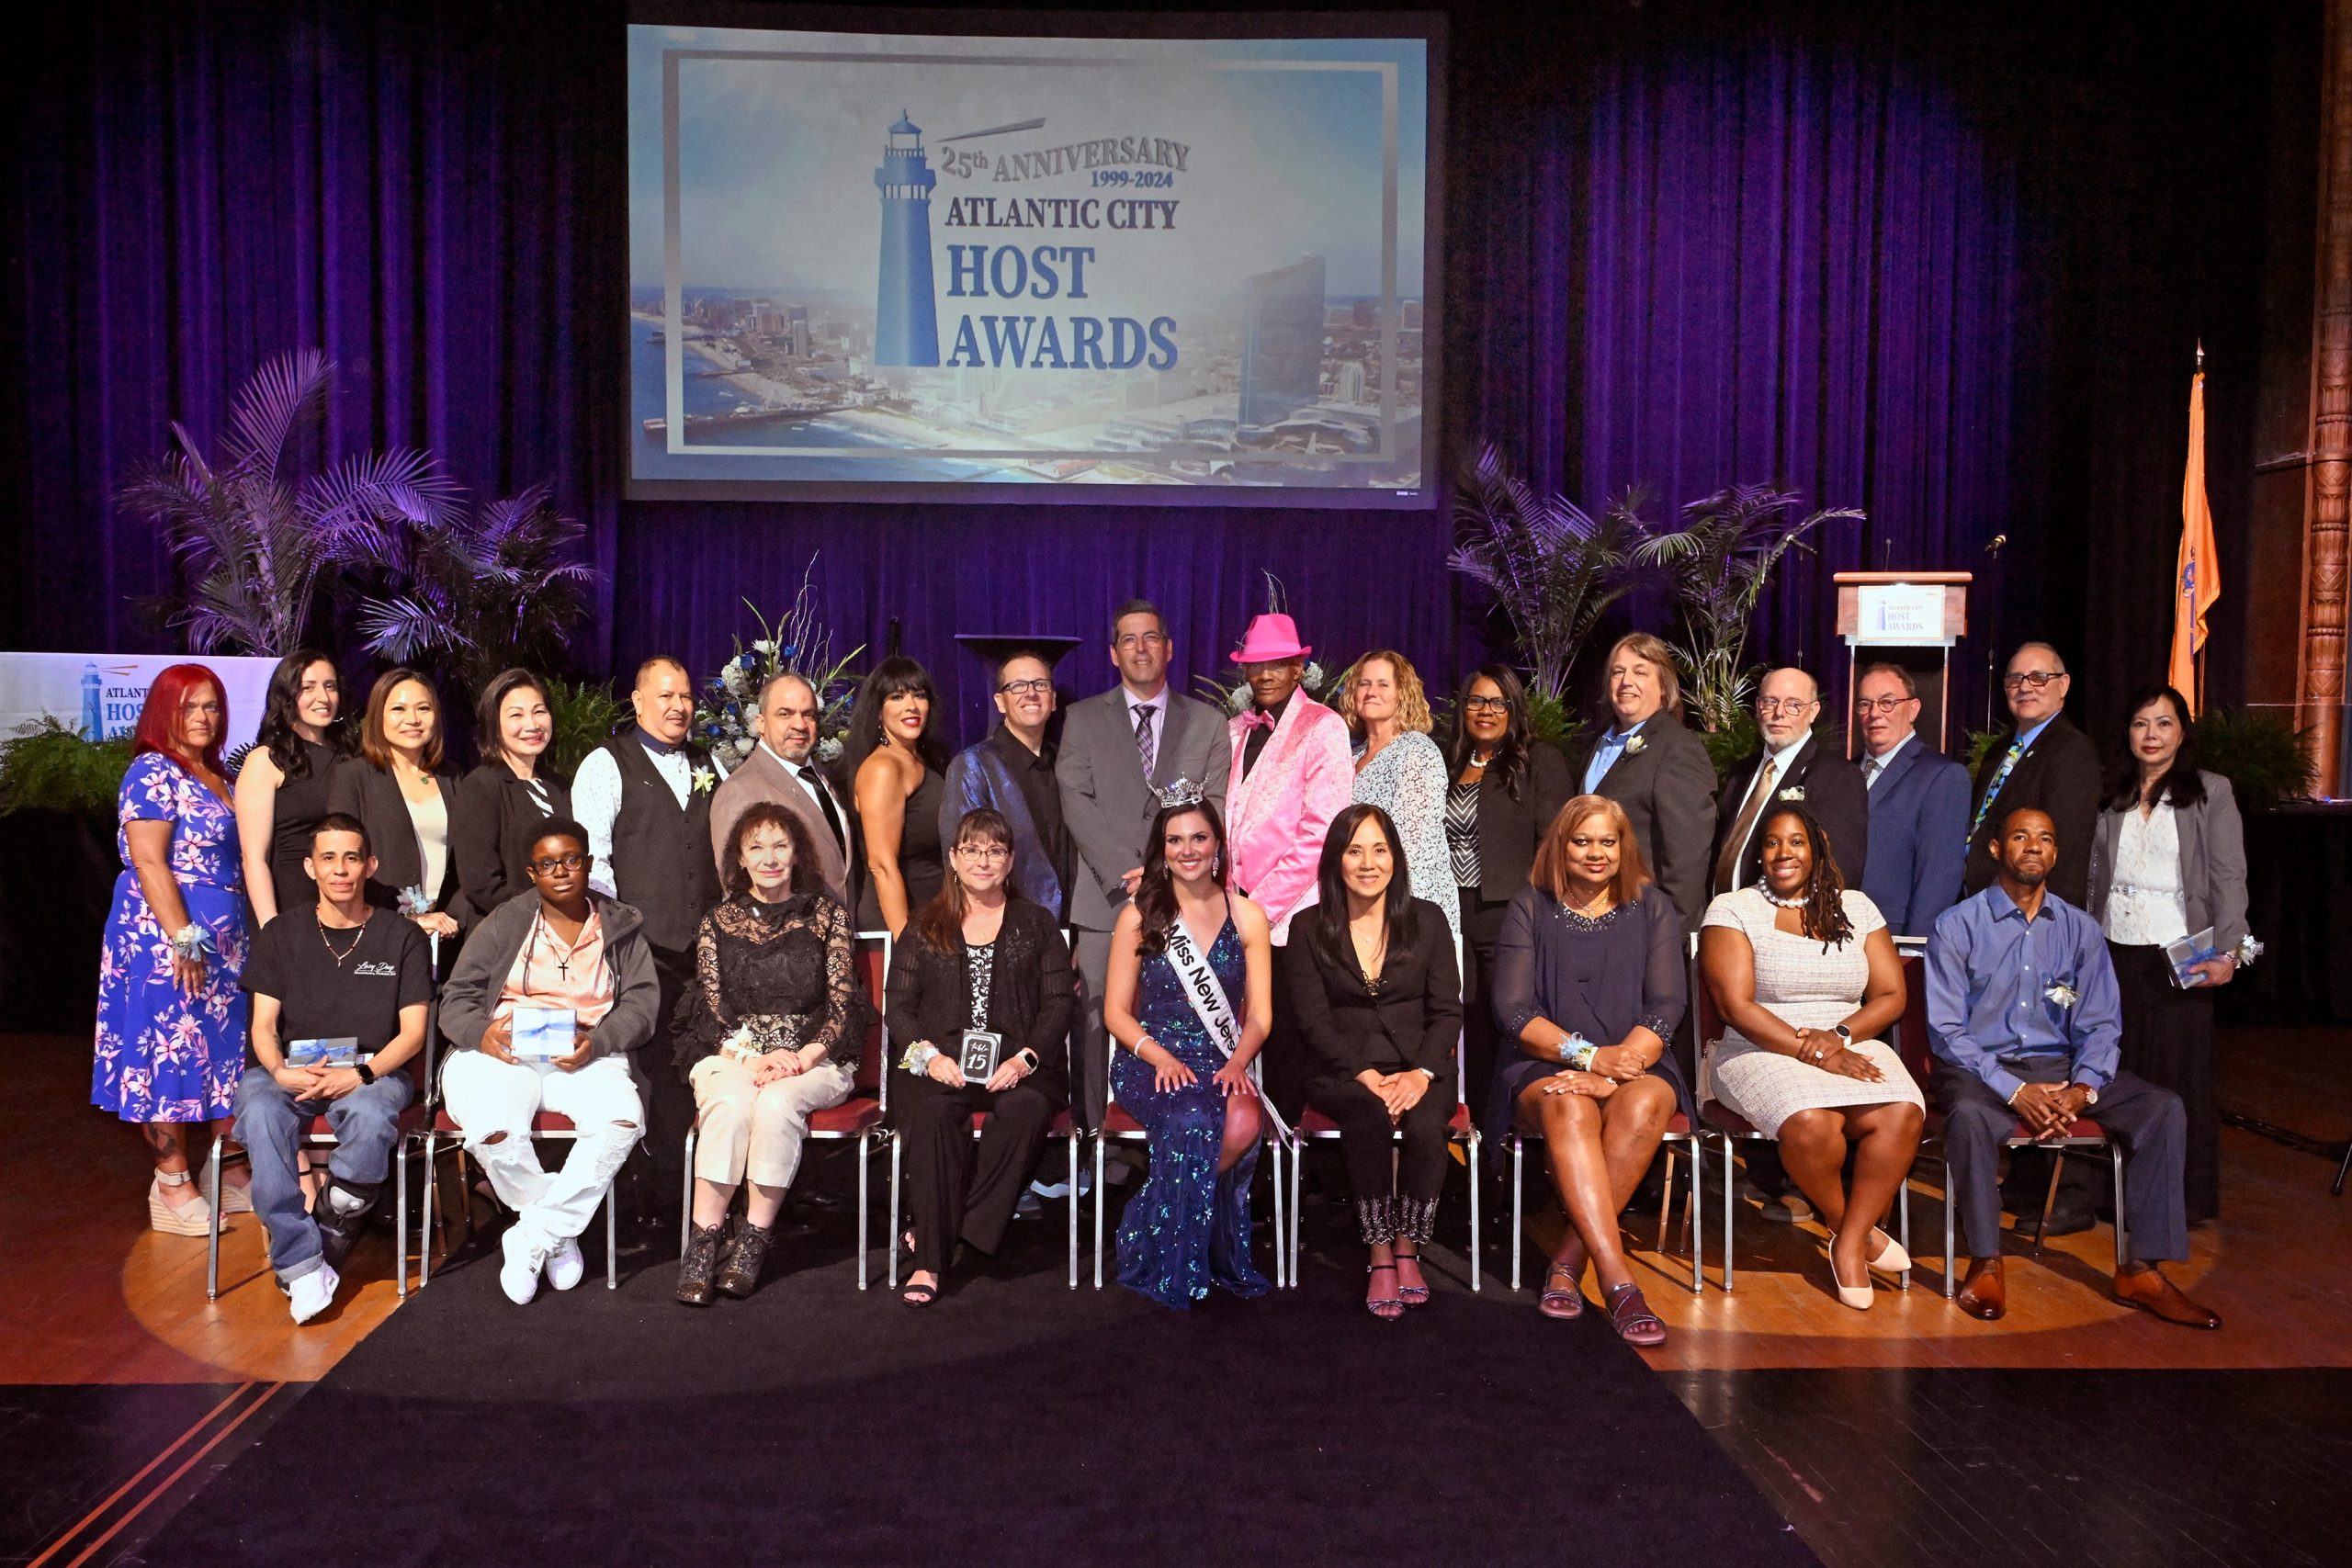 The 25th Annual Atlantic City Host Awards and Spirit of Hospitality Award was held on Wednesday, May 8, 2024, at Jim Whelan Boardwalk Hall in the Adrian Phillips Theater. Pictured here with the Host Award winners are CRDA Executive Director Eric Scheffler, CRDA Deputy Executive Director Maisha Moore, Miss New Jersey Victoria Mozitis, and Spirit of Hospitality Award Winner Scott Cronick, WOND radio personality, journalist, and co-owner of the Tennessee Avenue Beer Hall.